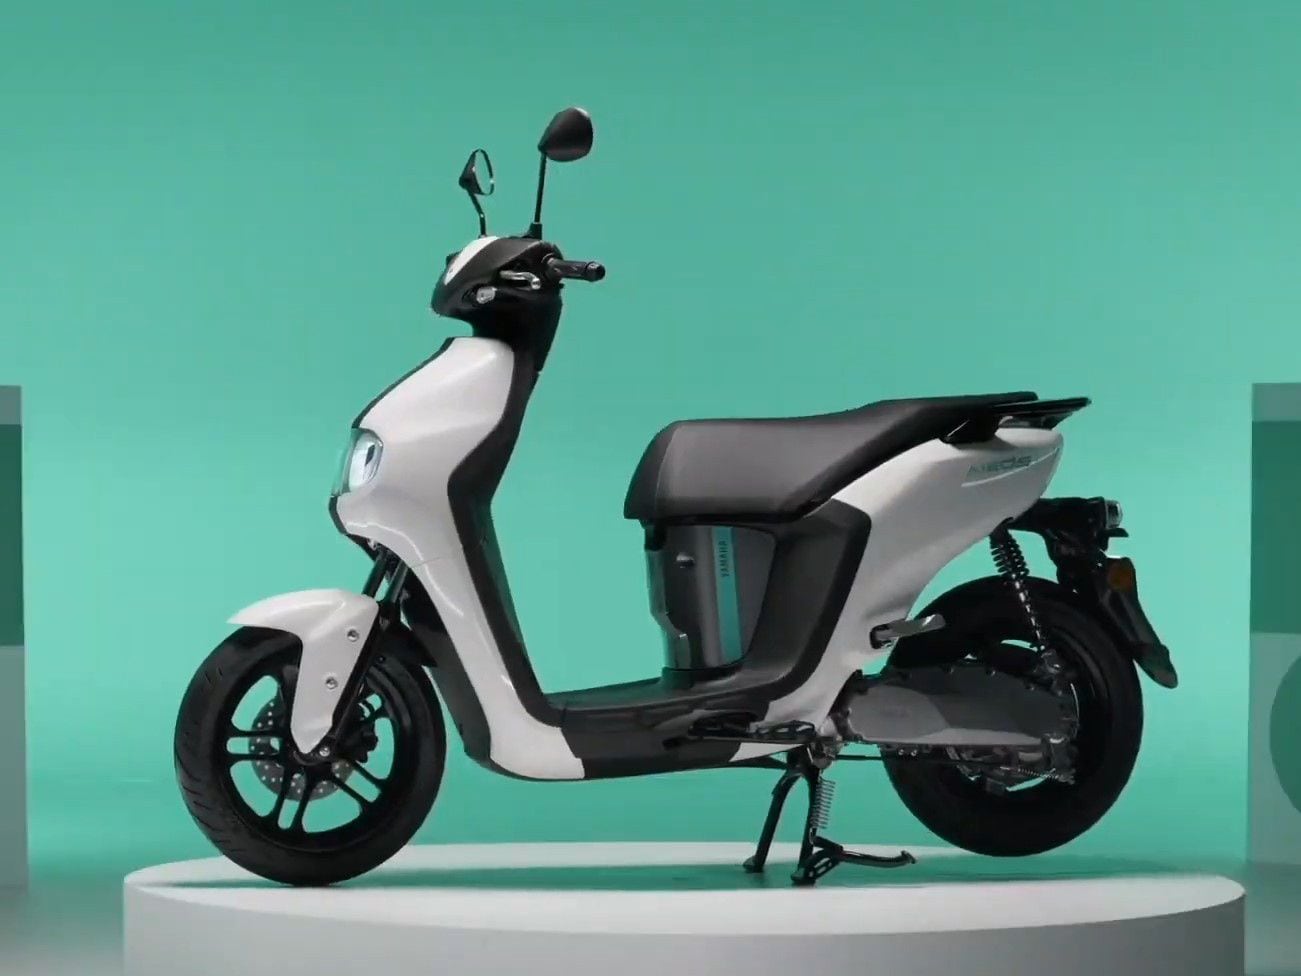 With the E01 not expected to be available for sale right away, Yamaha is instead pushing the smaller Neo’s electric scooter in Europe first. Pak power is 3 horses, with 38 pound-feet of torque to push 216 pounds.